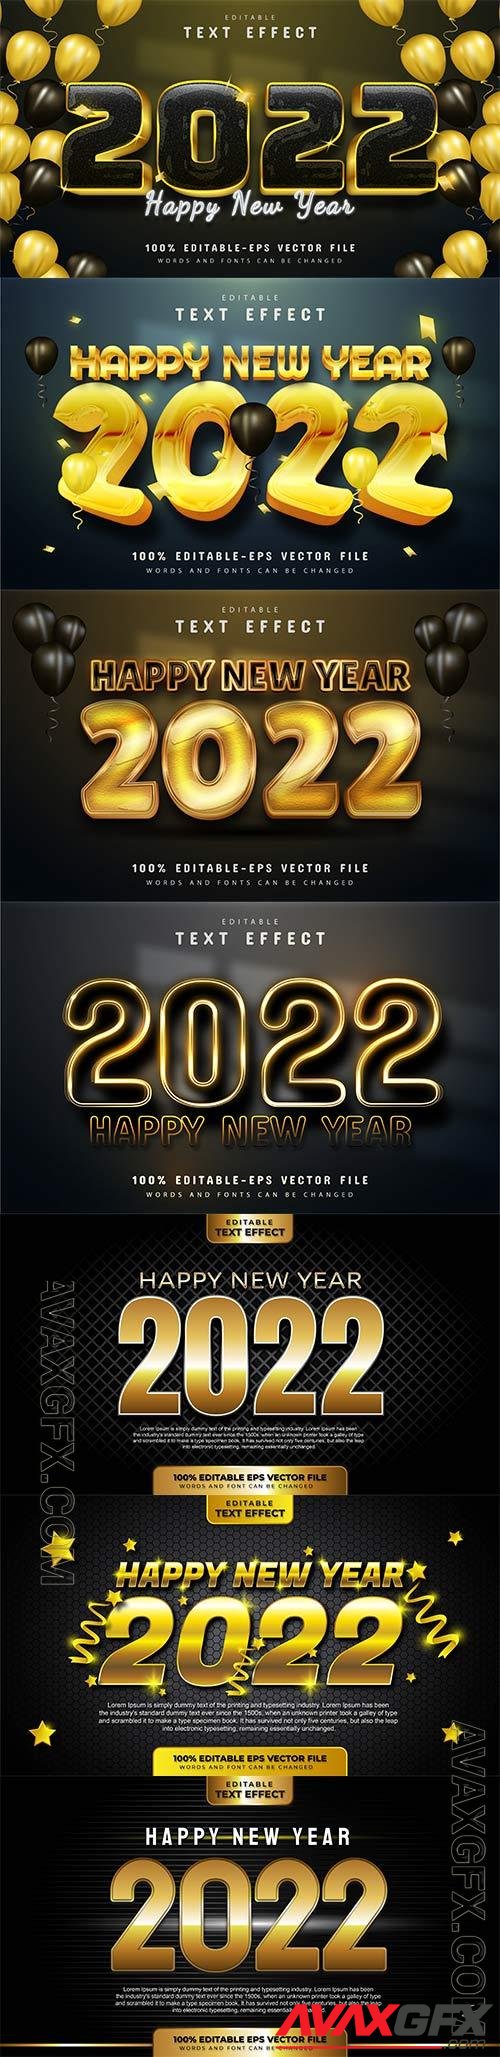 Happy new year 2022 gold 3d editable text effect premium vector